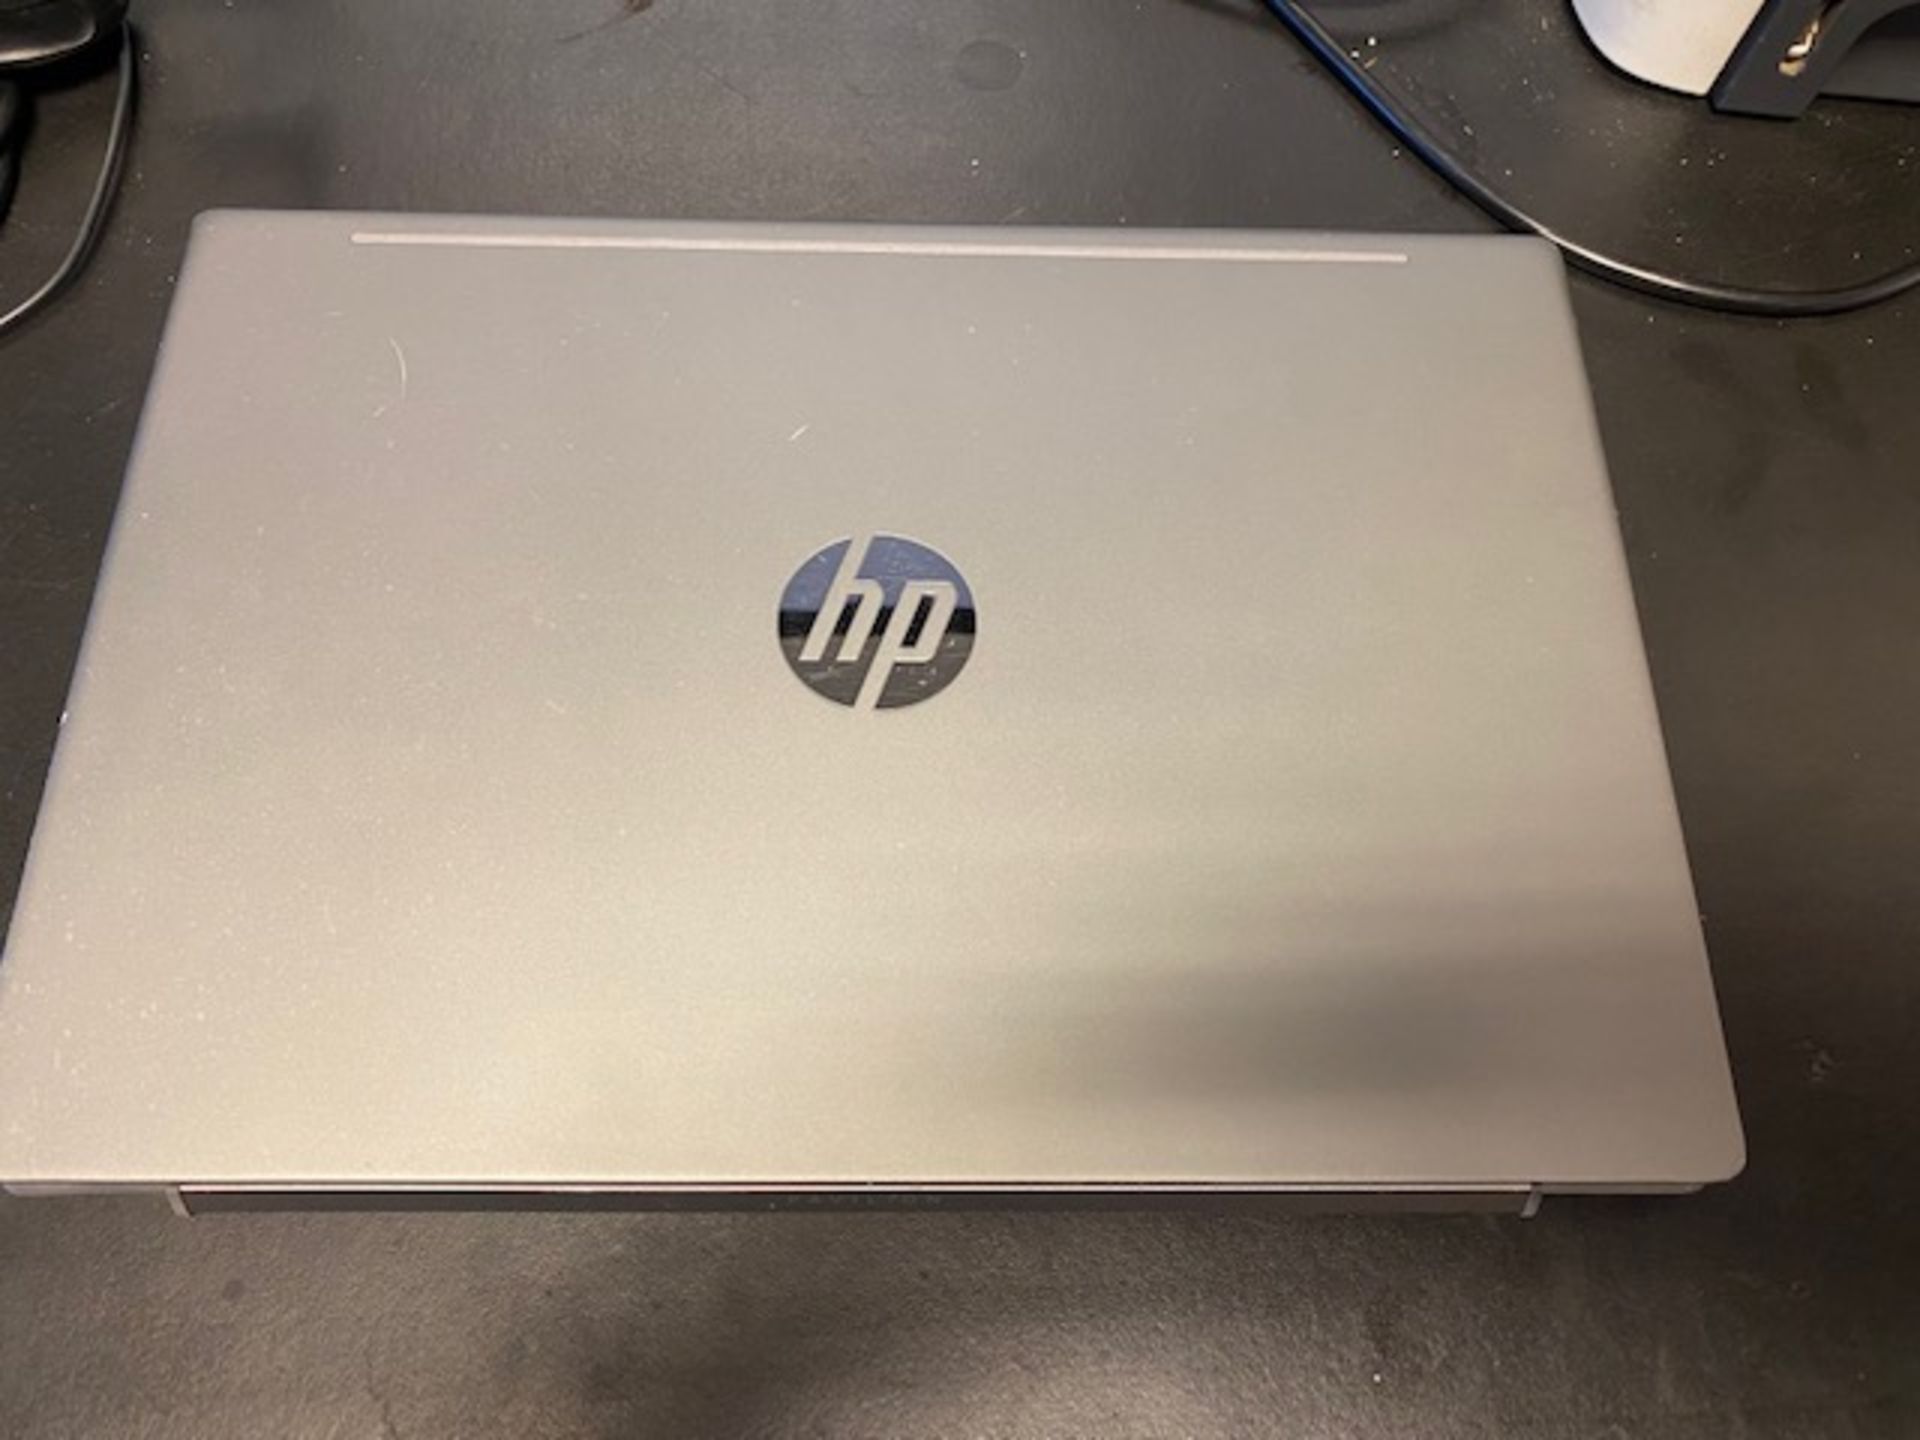 HP Pavilion 14 inch laptop with core i3 8th gen processor Model 14 - Image 2 of 6